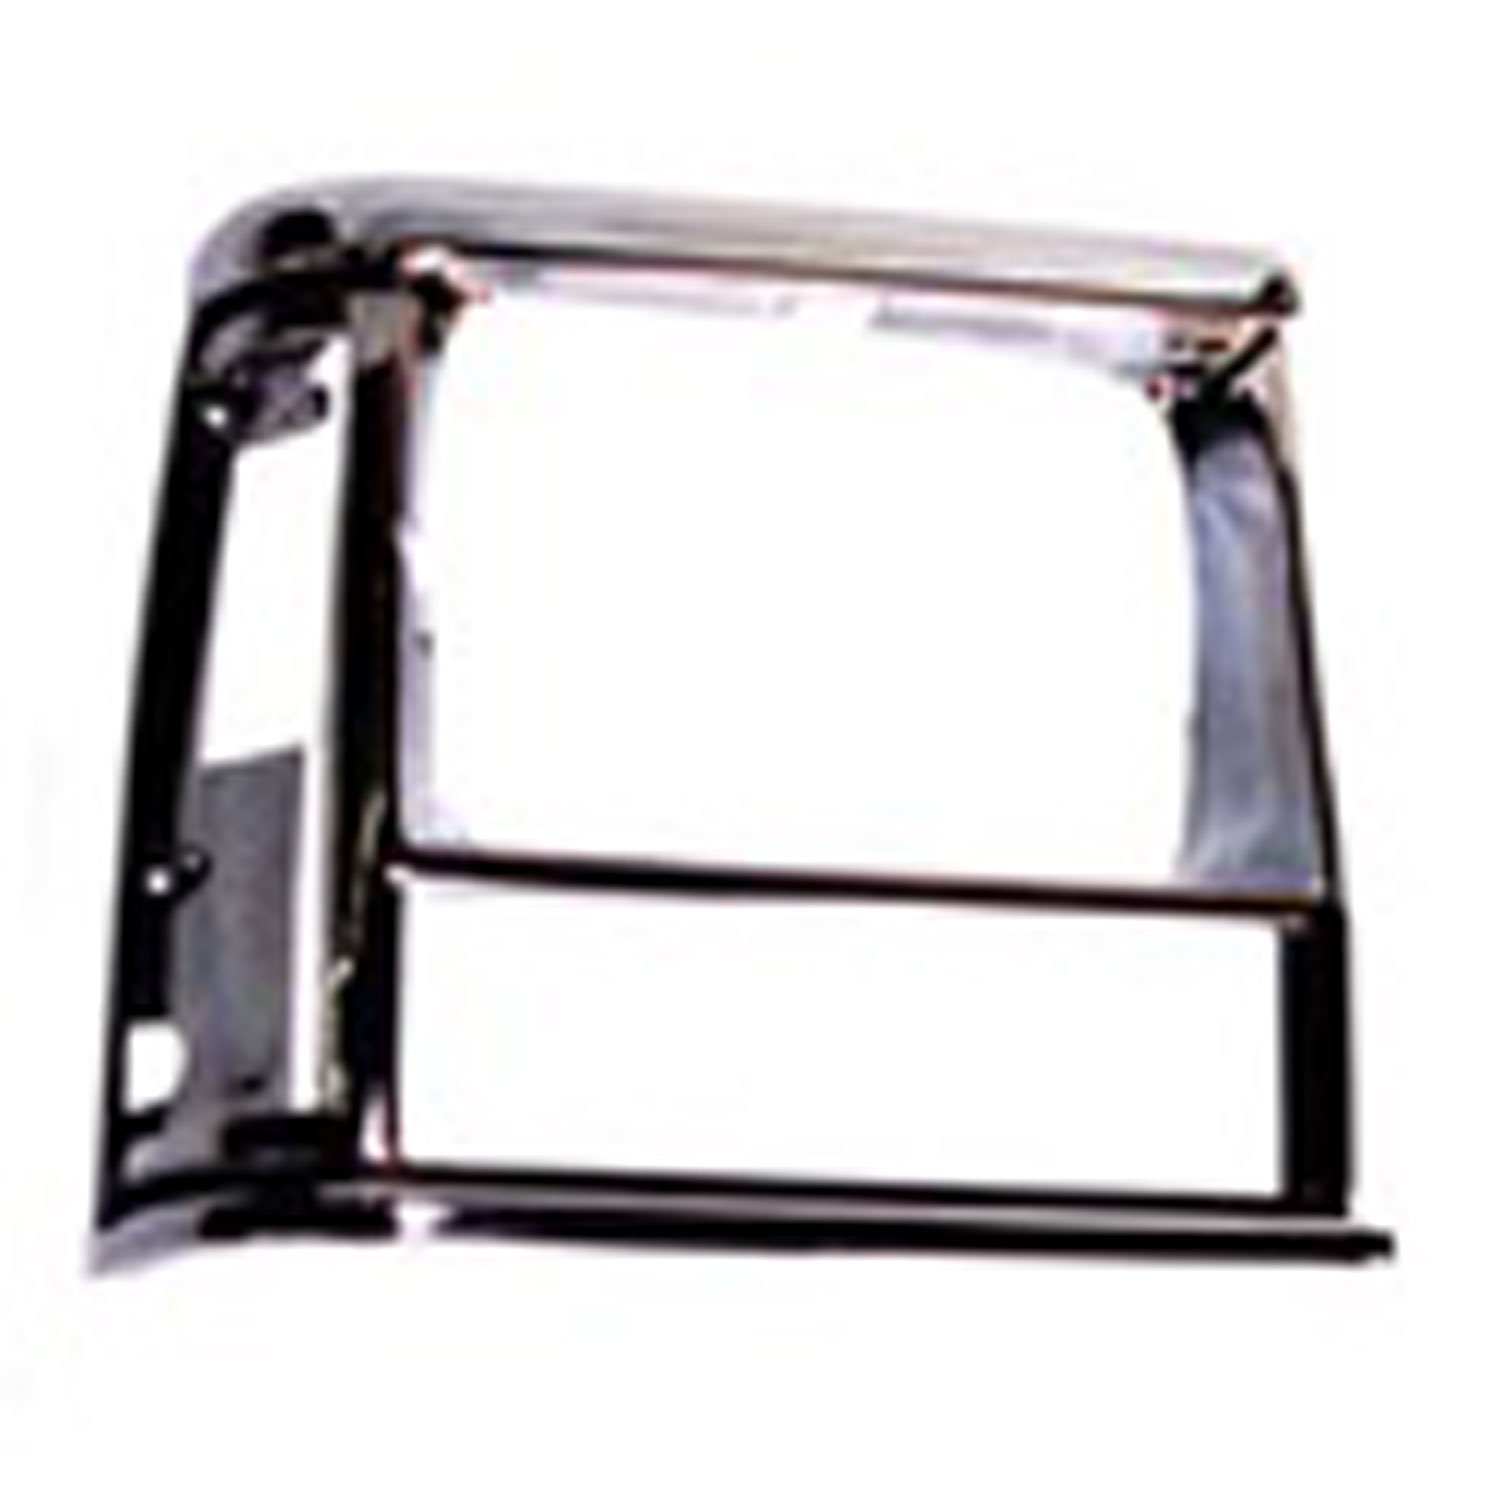 This black and chrome headlight bezel from Omix-ADA fits the right side on 91-96 Jeep Cherokee XJ.